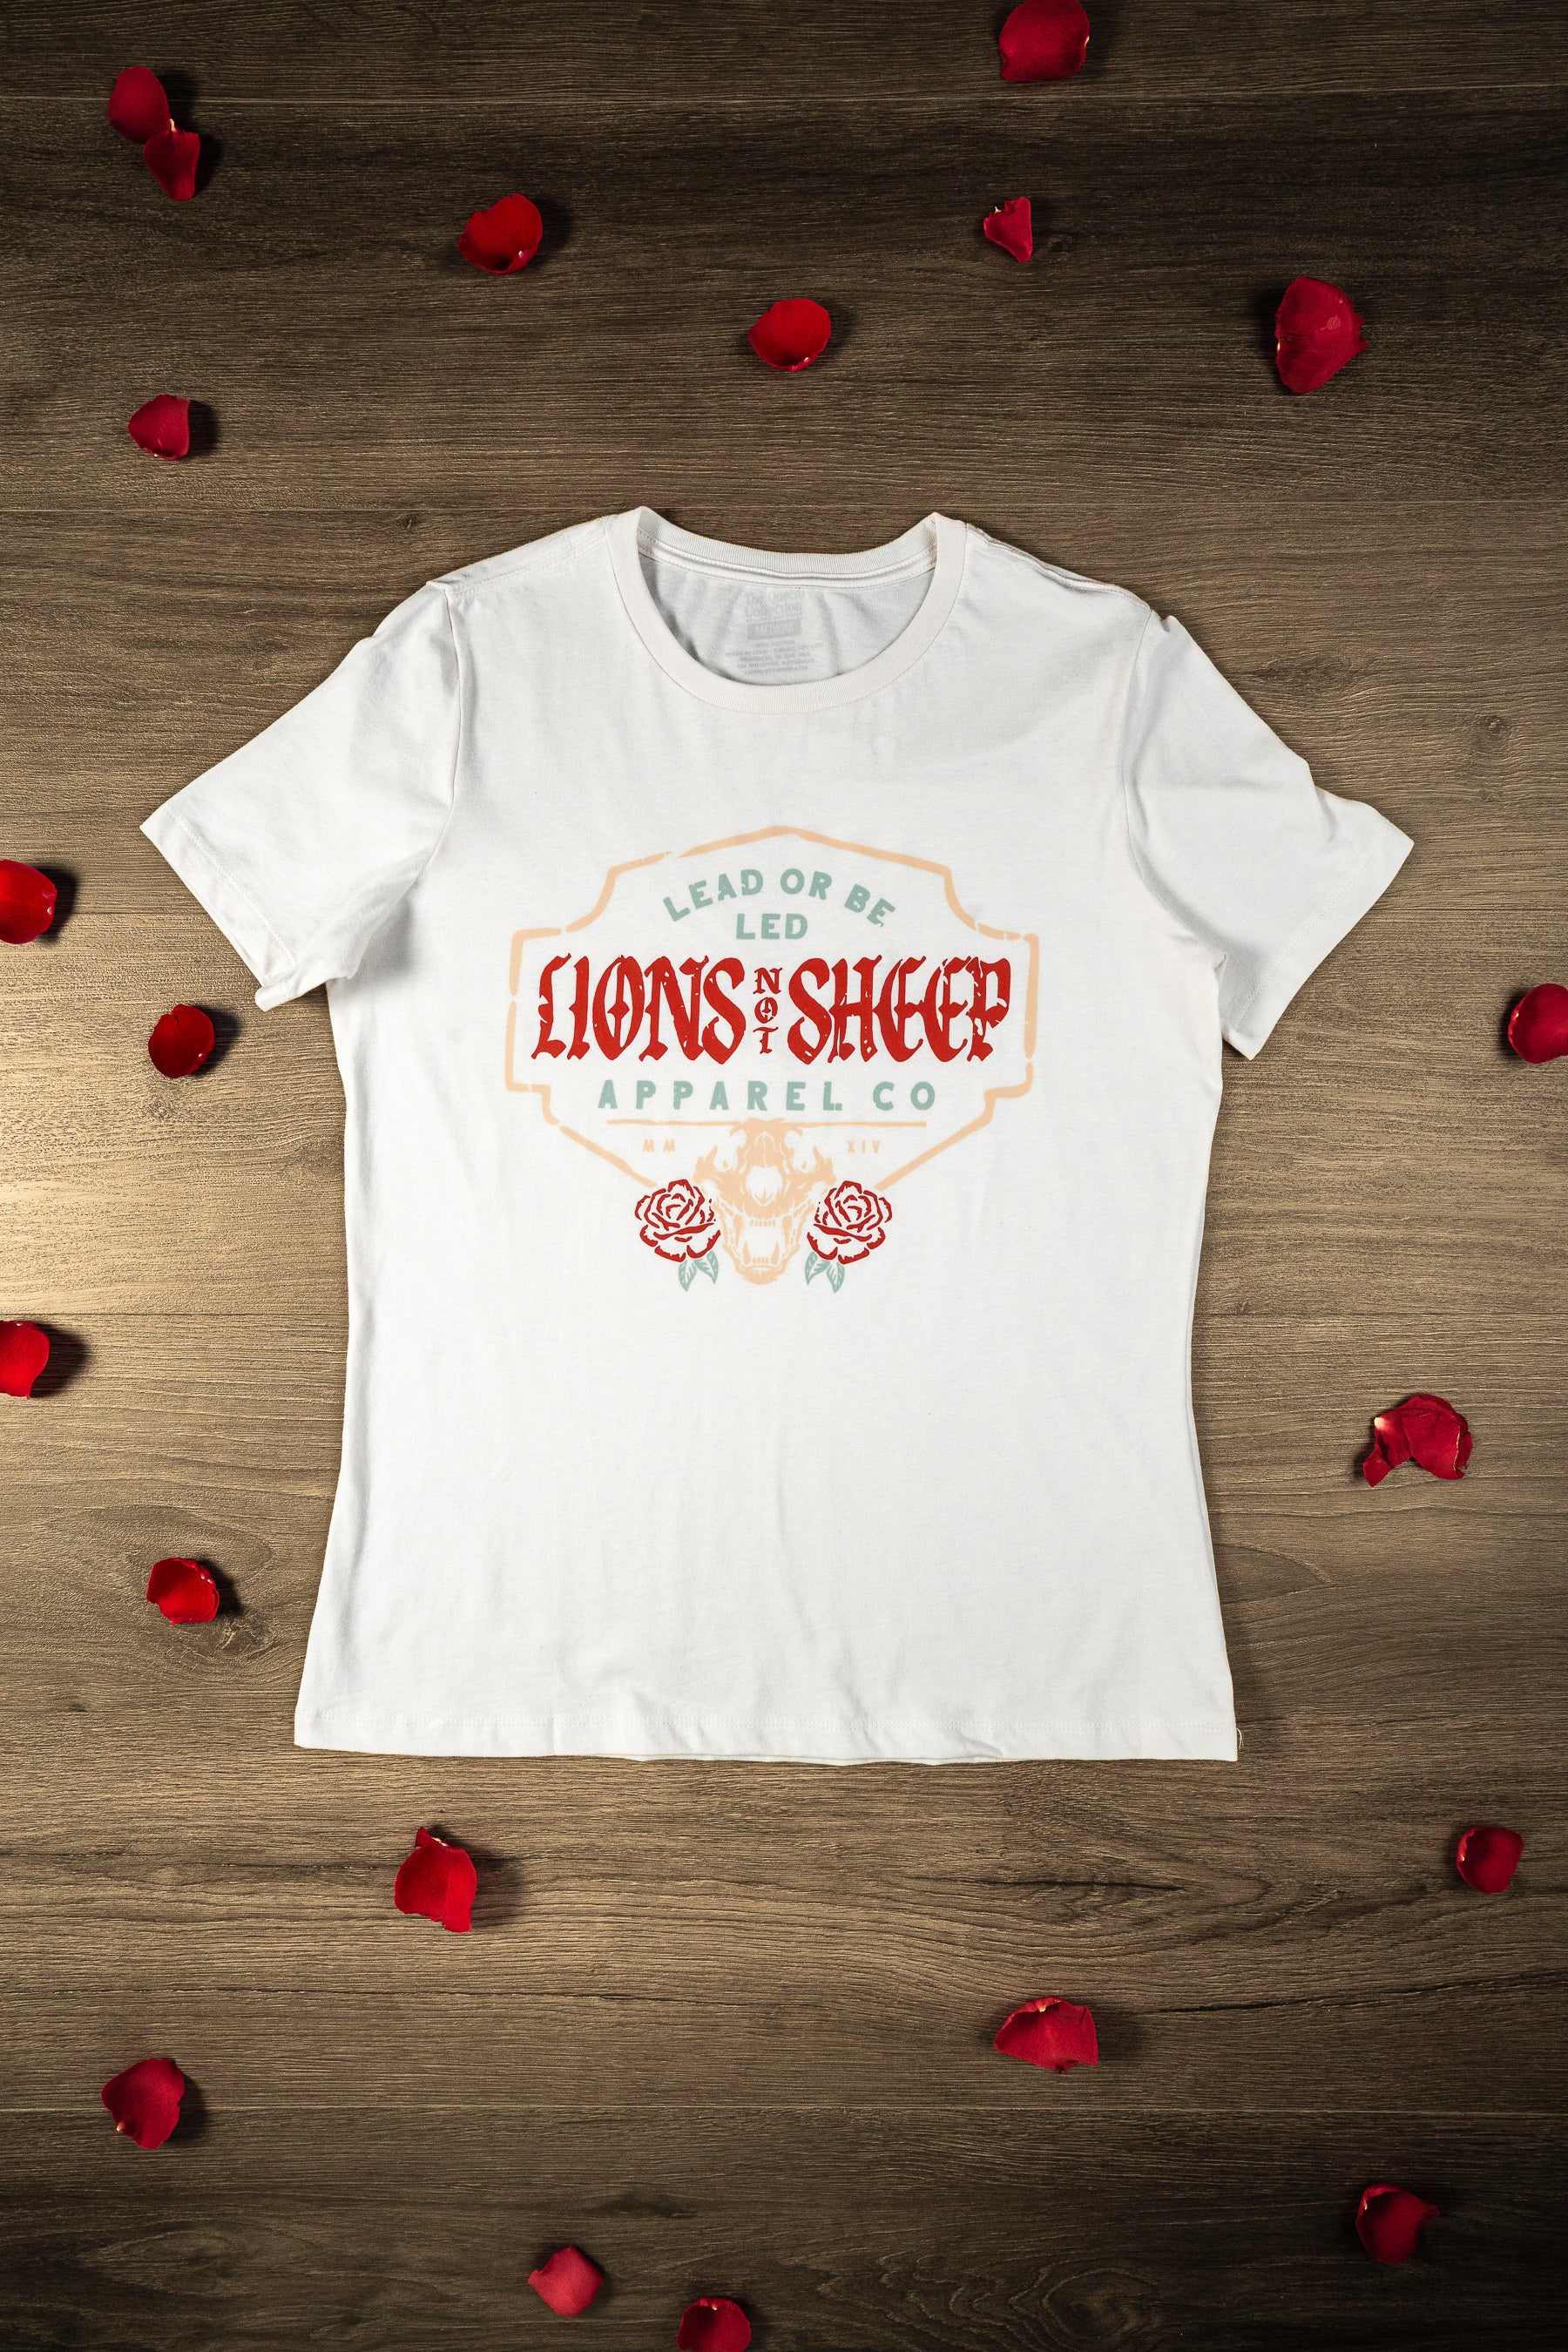 Lions Not Sheep Women's "Till Death" Valentine's Day Tee - Lions Not Sheep ®